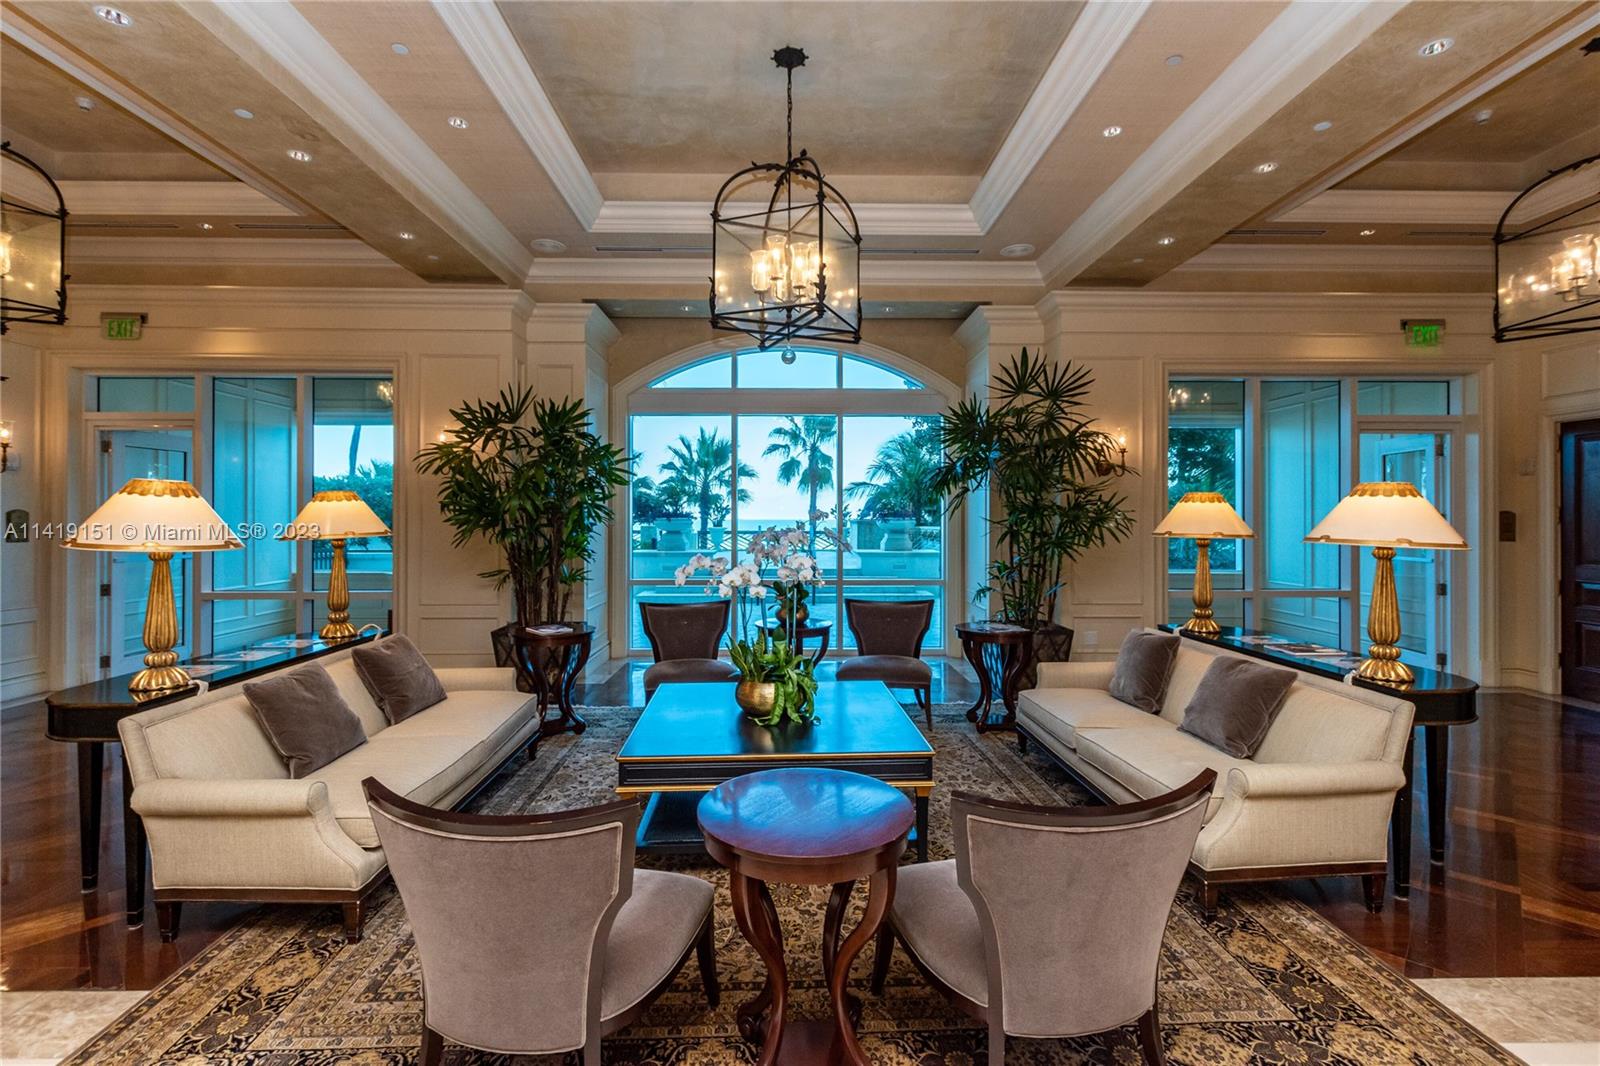 Turnberry Ocean Colony image #70